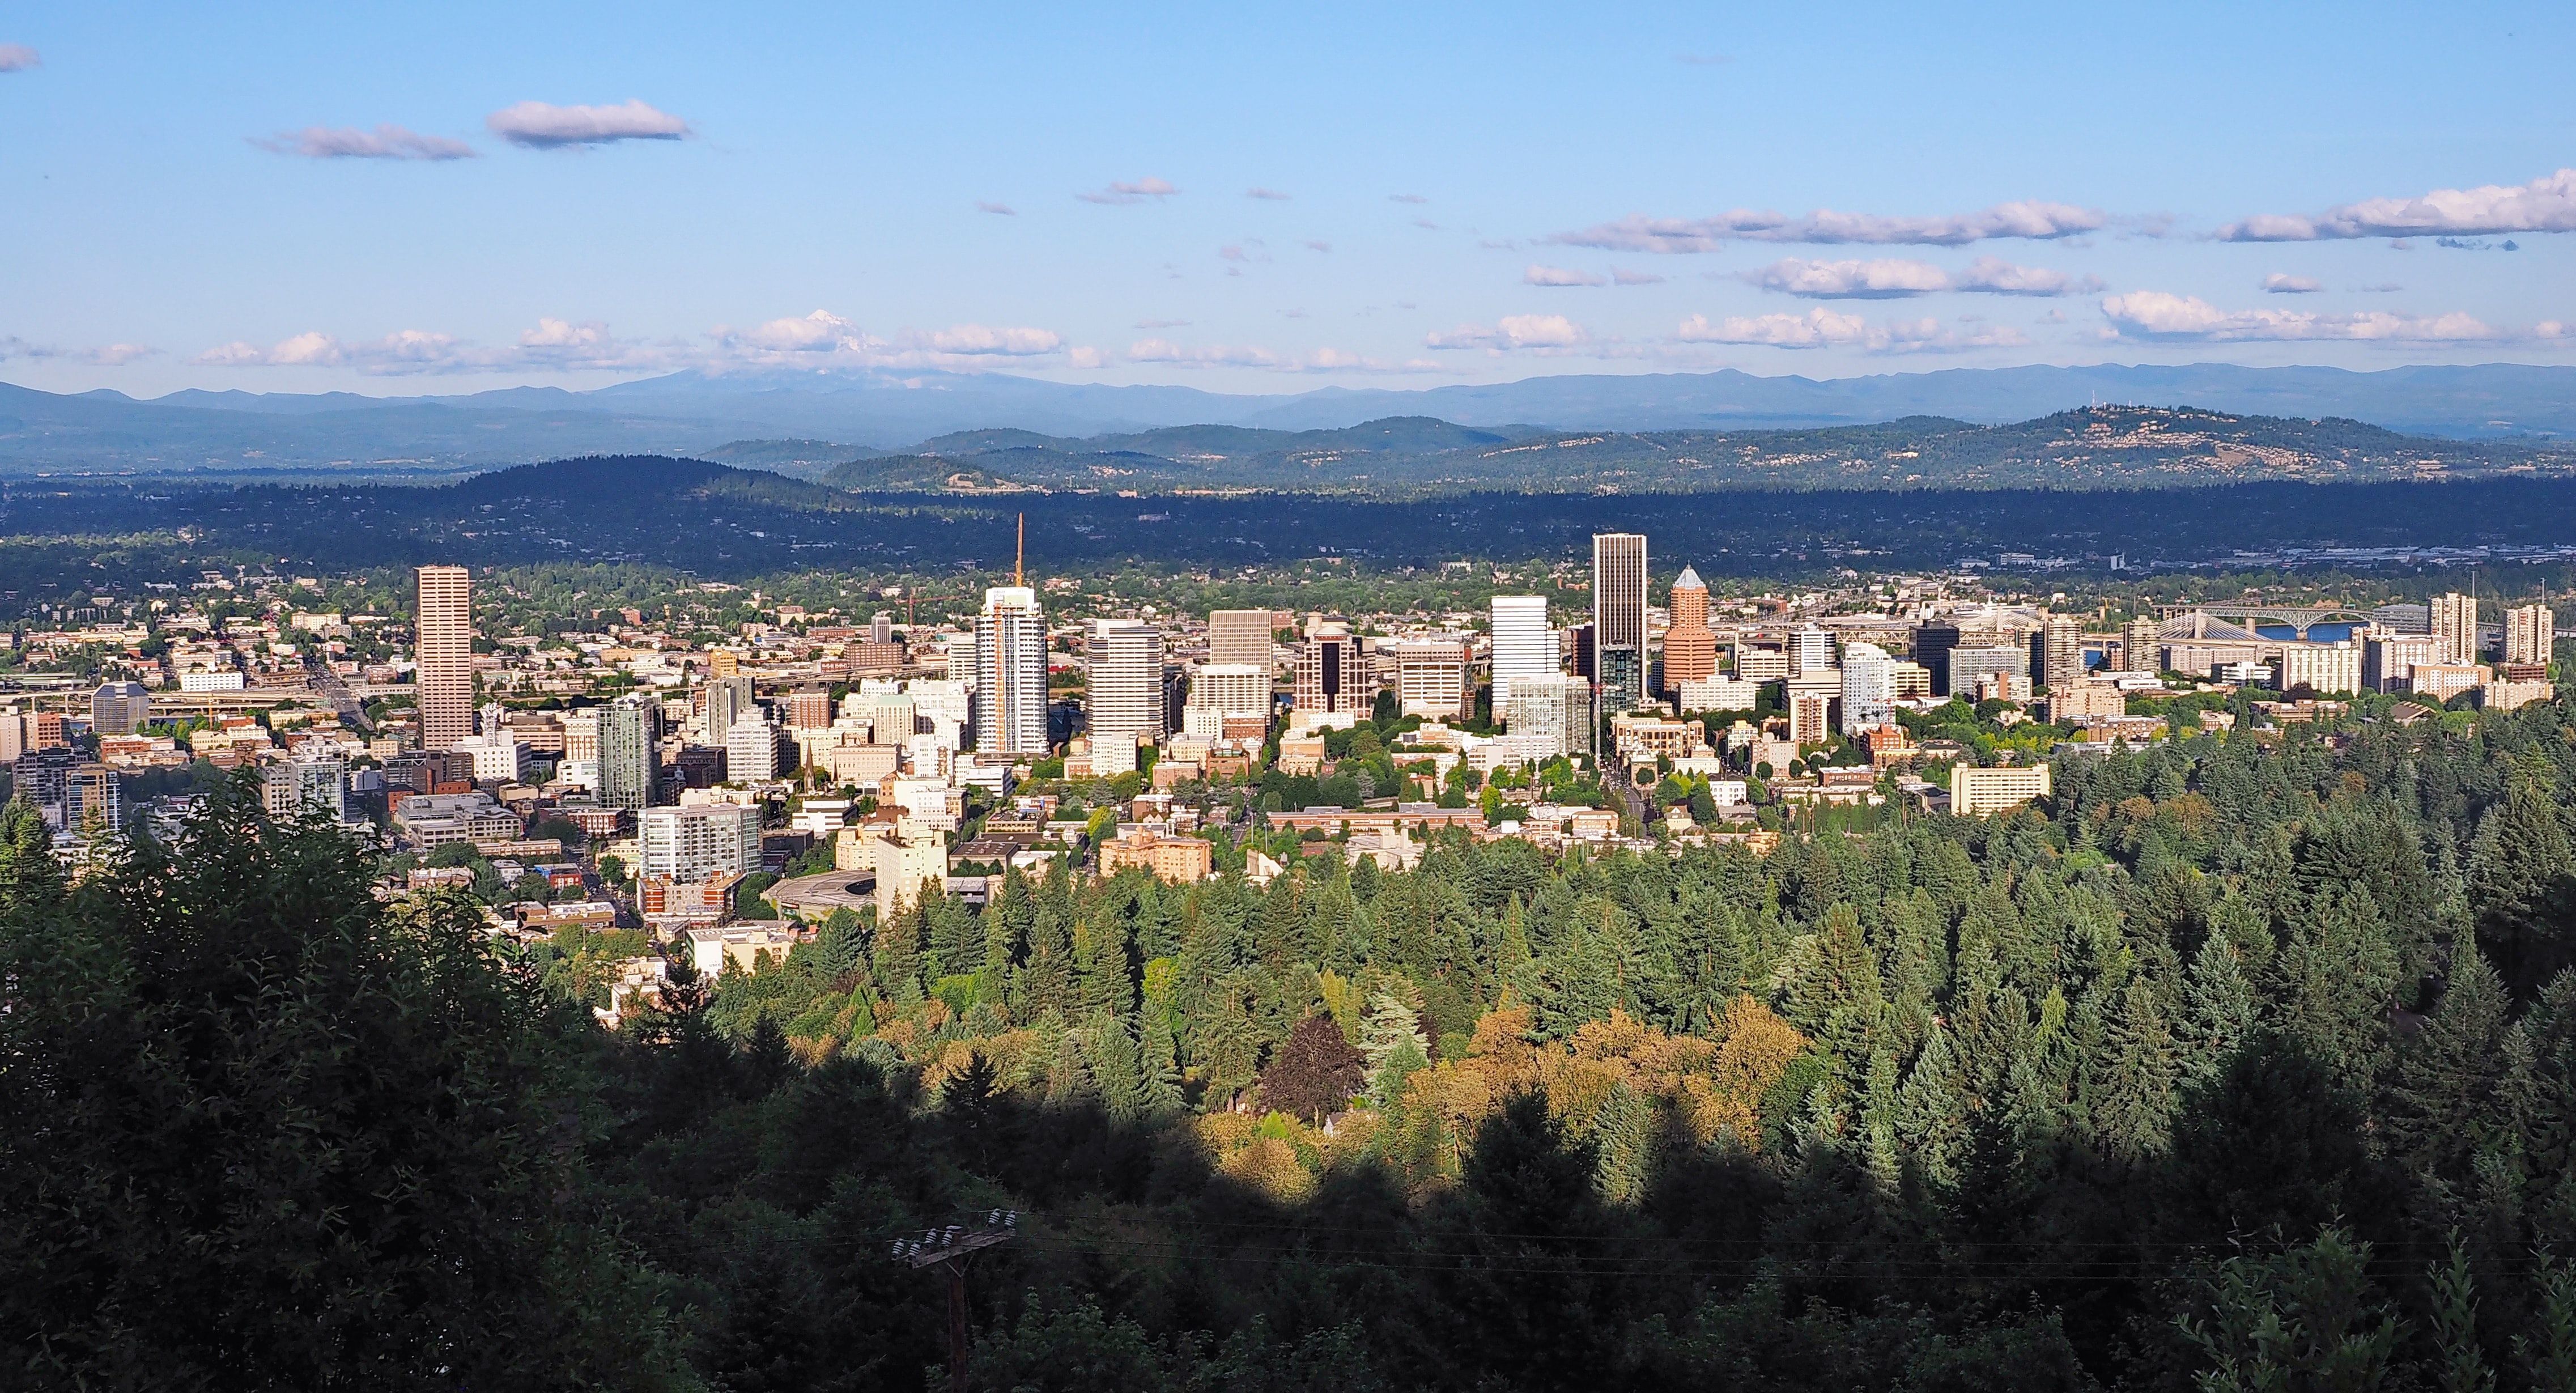 Beautiful view from the Pittock Mansion in Portland, Oregon.